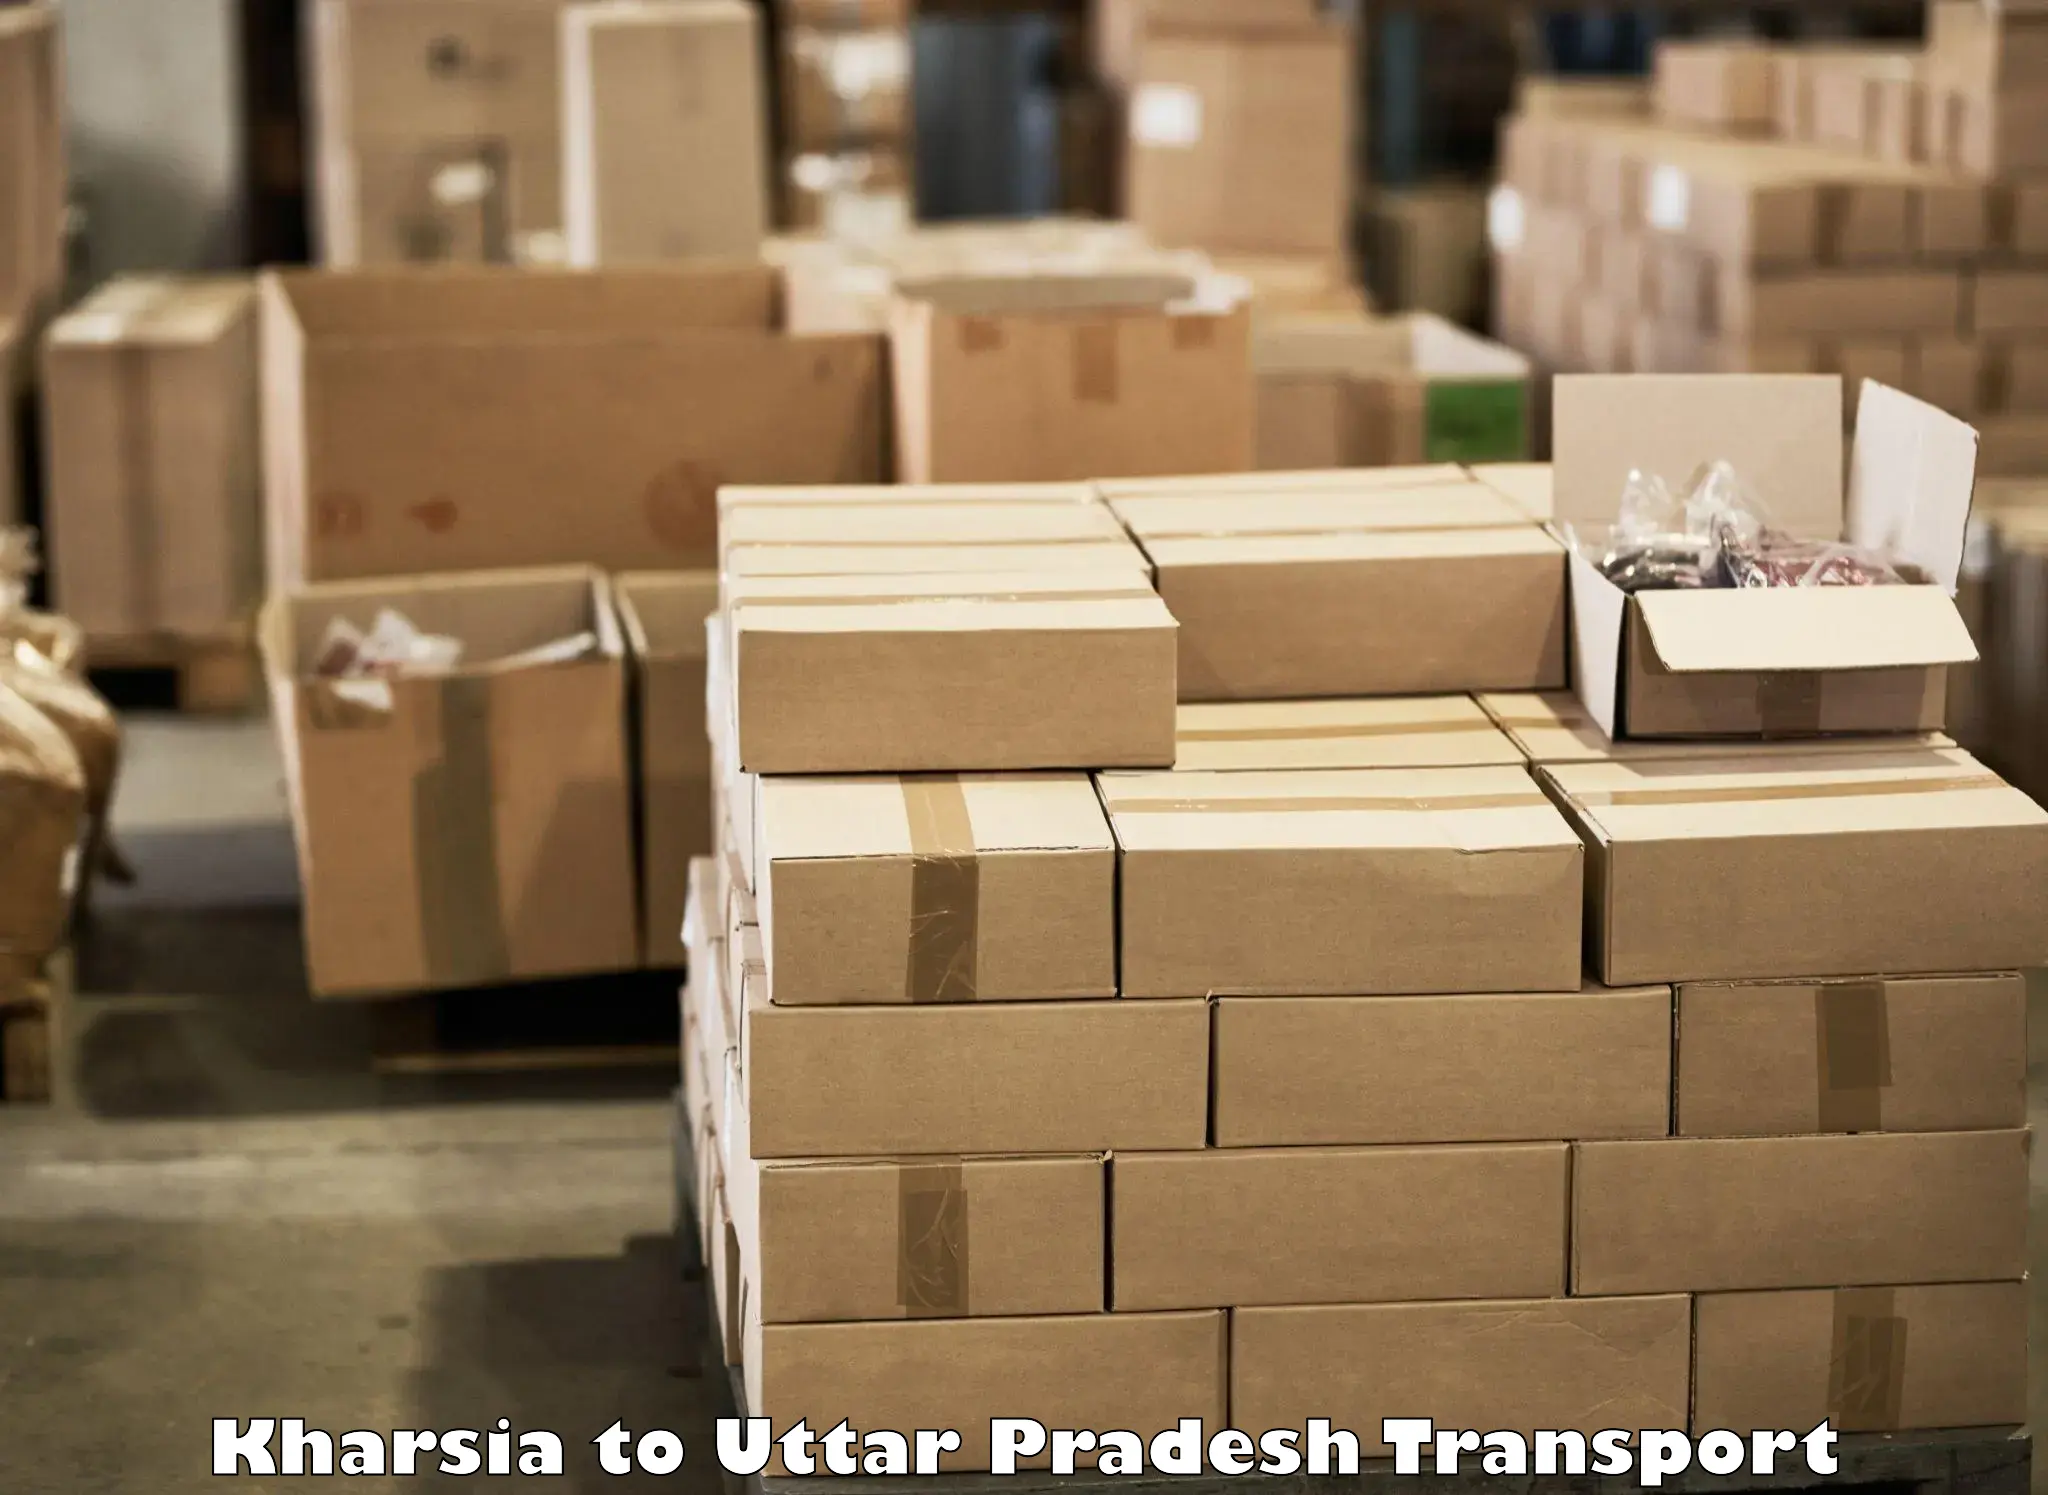 Daily parcel service transport Kharsia to Dhaurahara